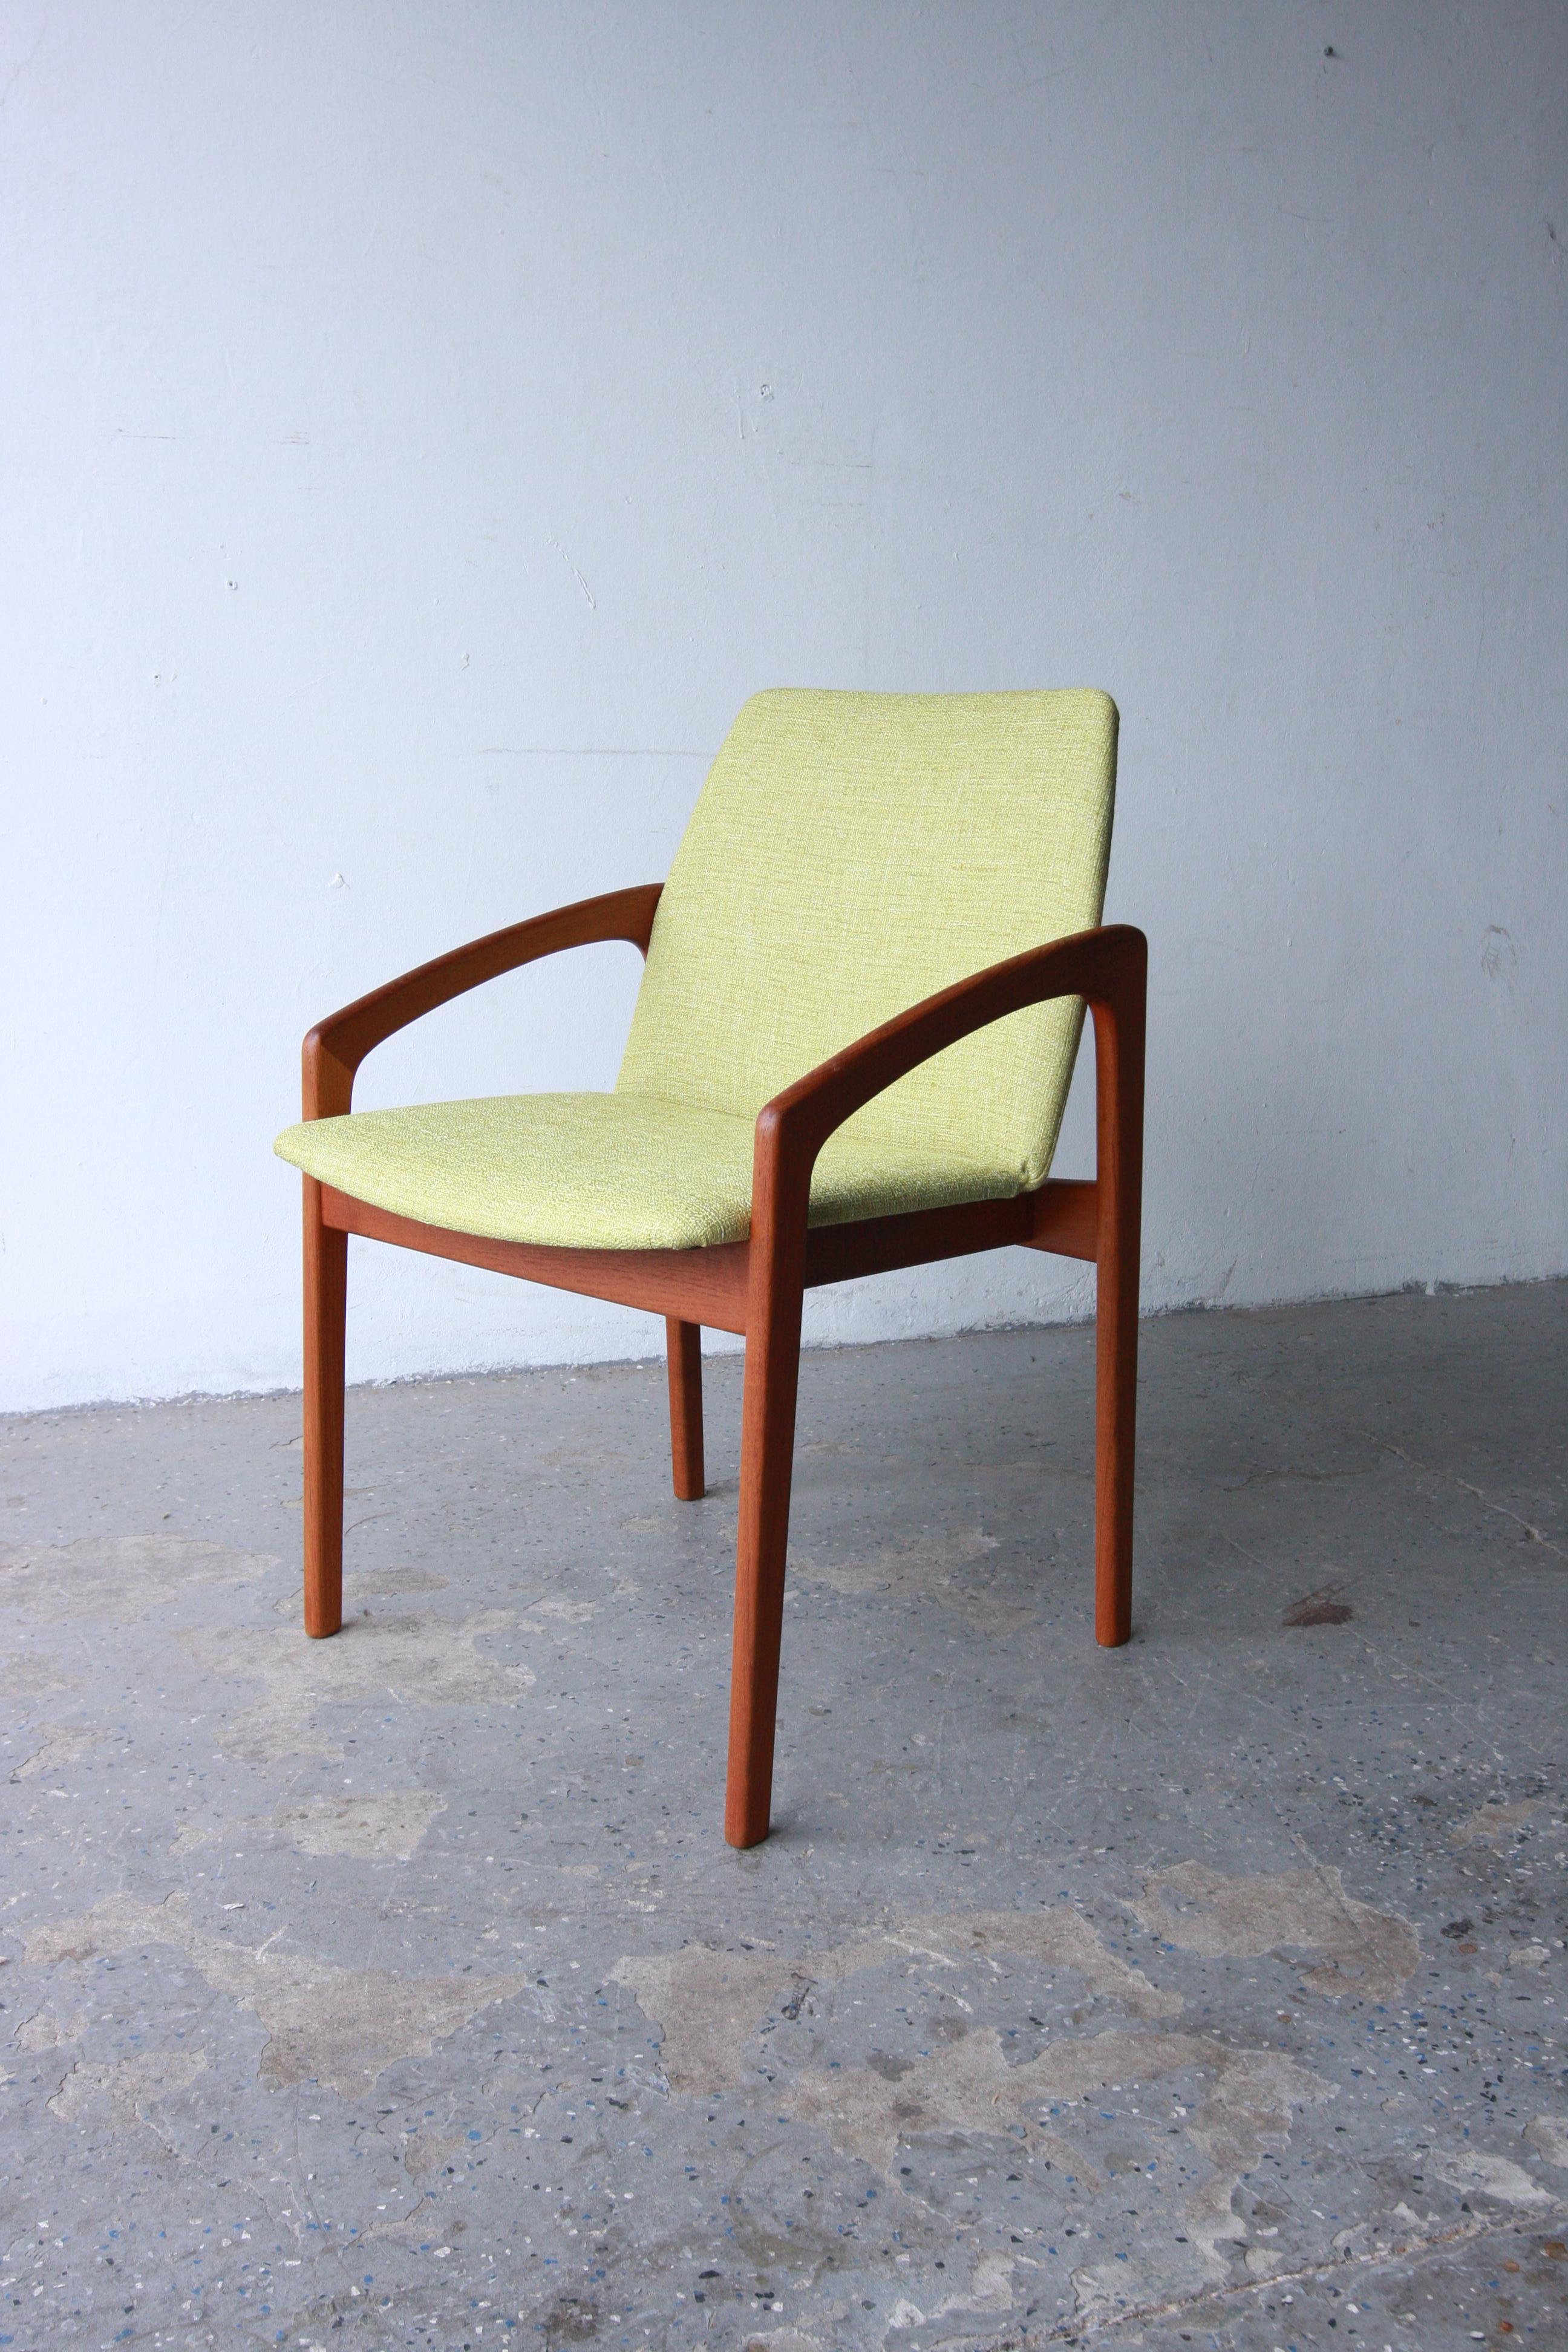 Collection of six Danish Modern  dining chairs, featuring solid teak continuous arms and legs, along with Newly upholstered seats and backs. Designed by Henning Kjaernulf for Korup Stolefabrik 

Chairs have been refinished and restored. And have